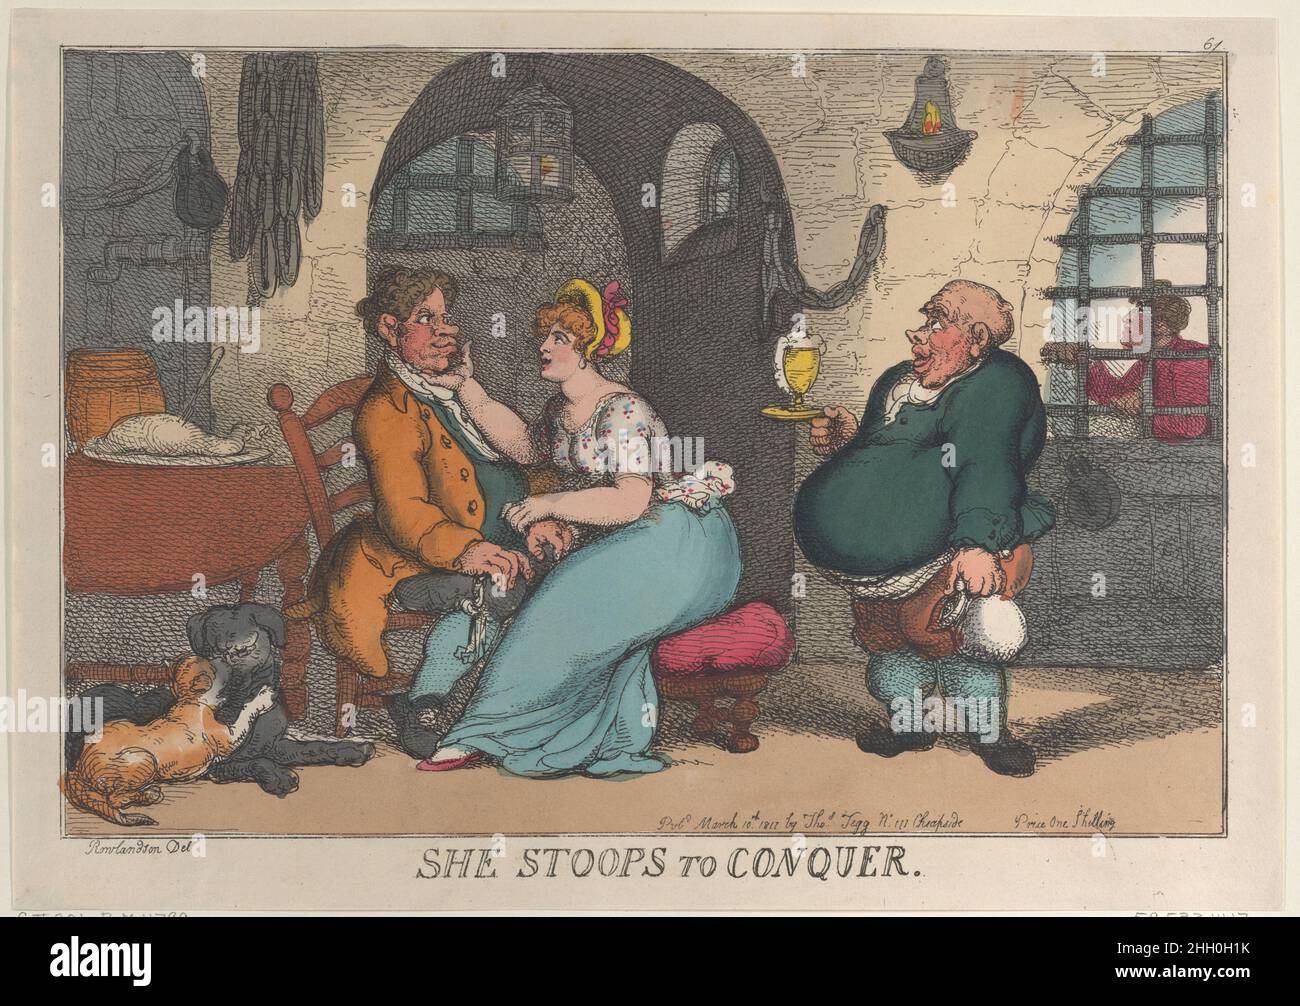 She Stoops to Conquer March 10, 1811 Thomas Rowlandson A pretty young woman sits closely to a prison guard, putting her hand on his face, while a handsome youth is behind bars at right. A portly man approaches them with a frothing glass.. She Stoops to Conquer. Thomas Rowlandson (British, London 1757–1827 London). March 10, 1811. Hand-colored etching. Thomas Tegg (British, 1776–1846). Prints Stock Photo